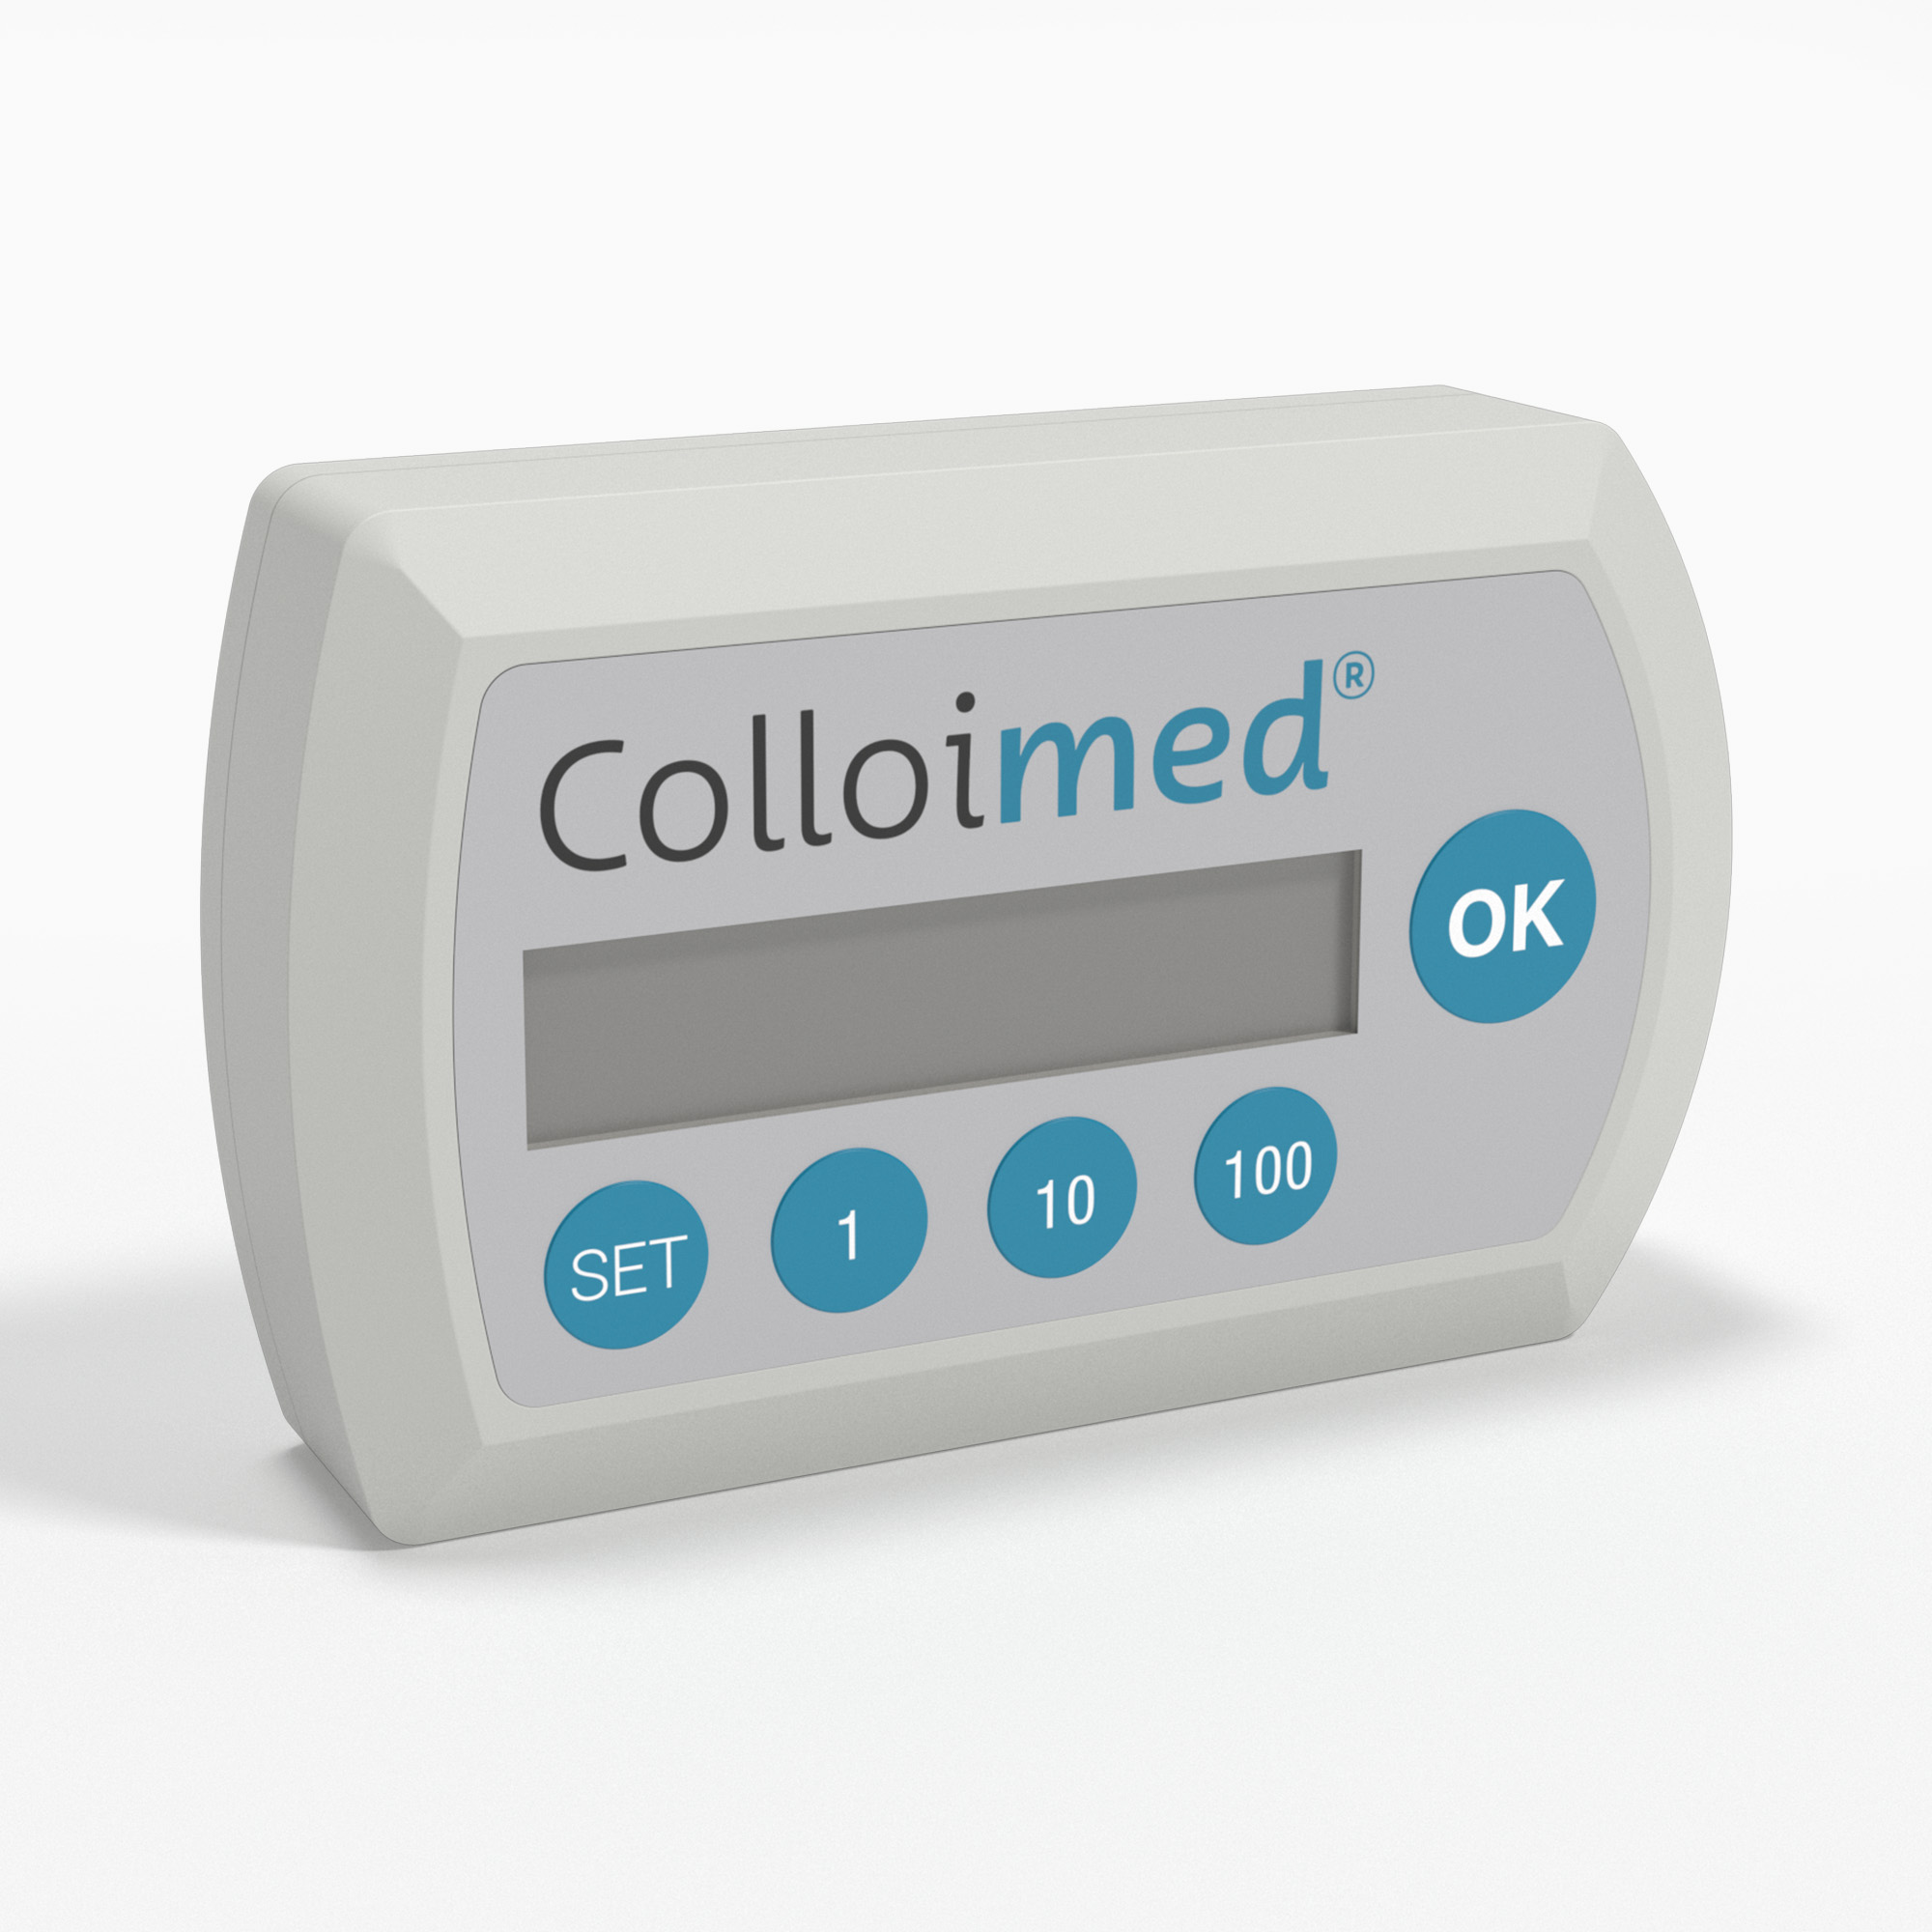 Rendering Collimed Device